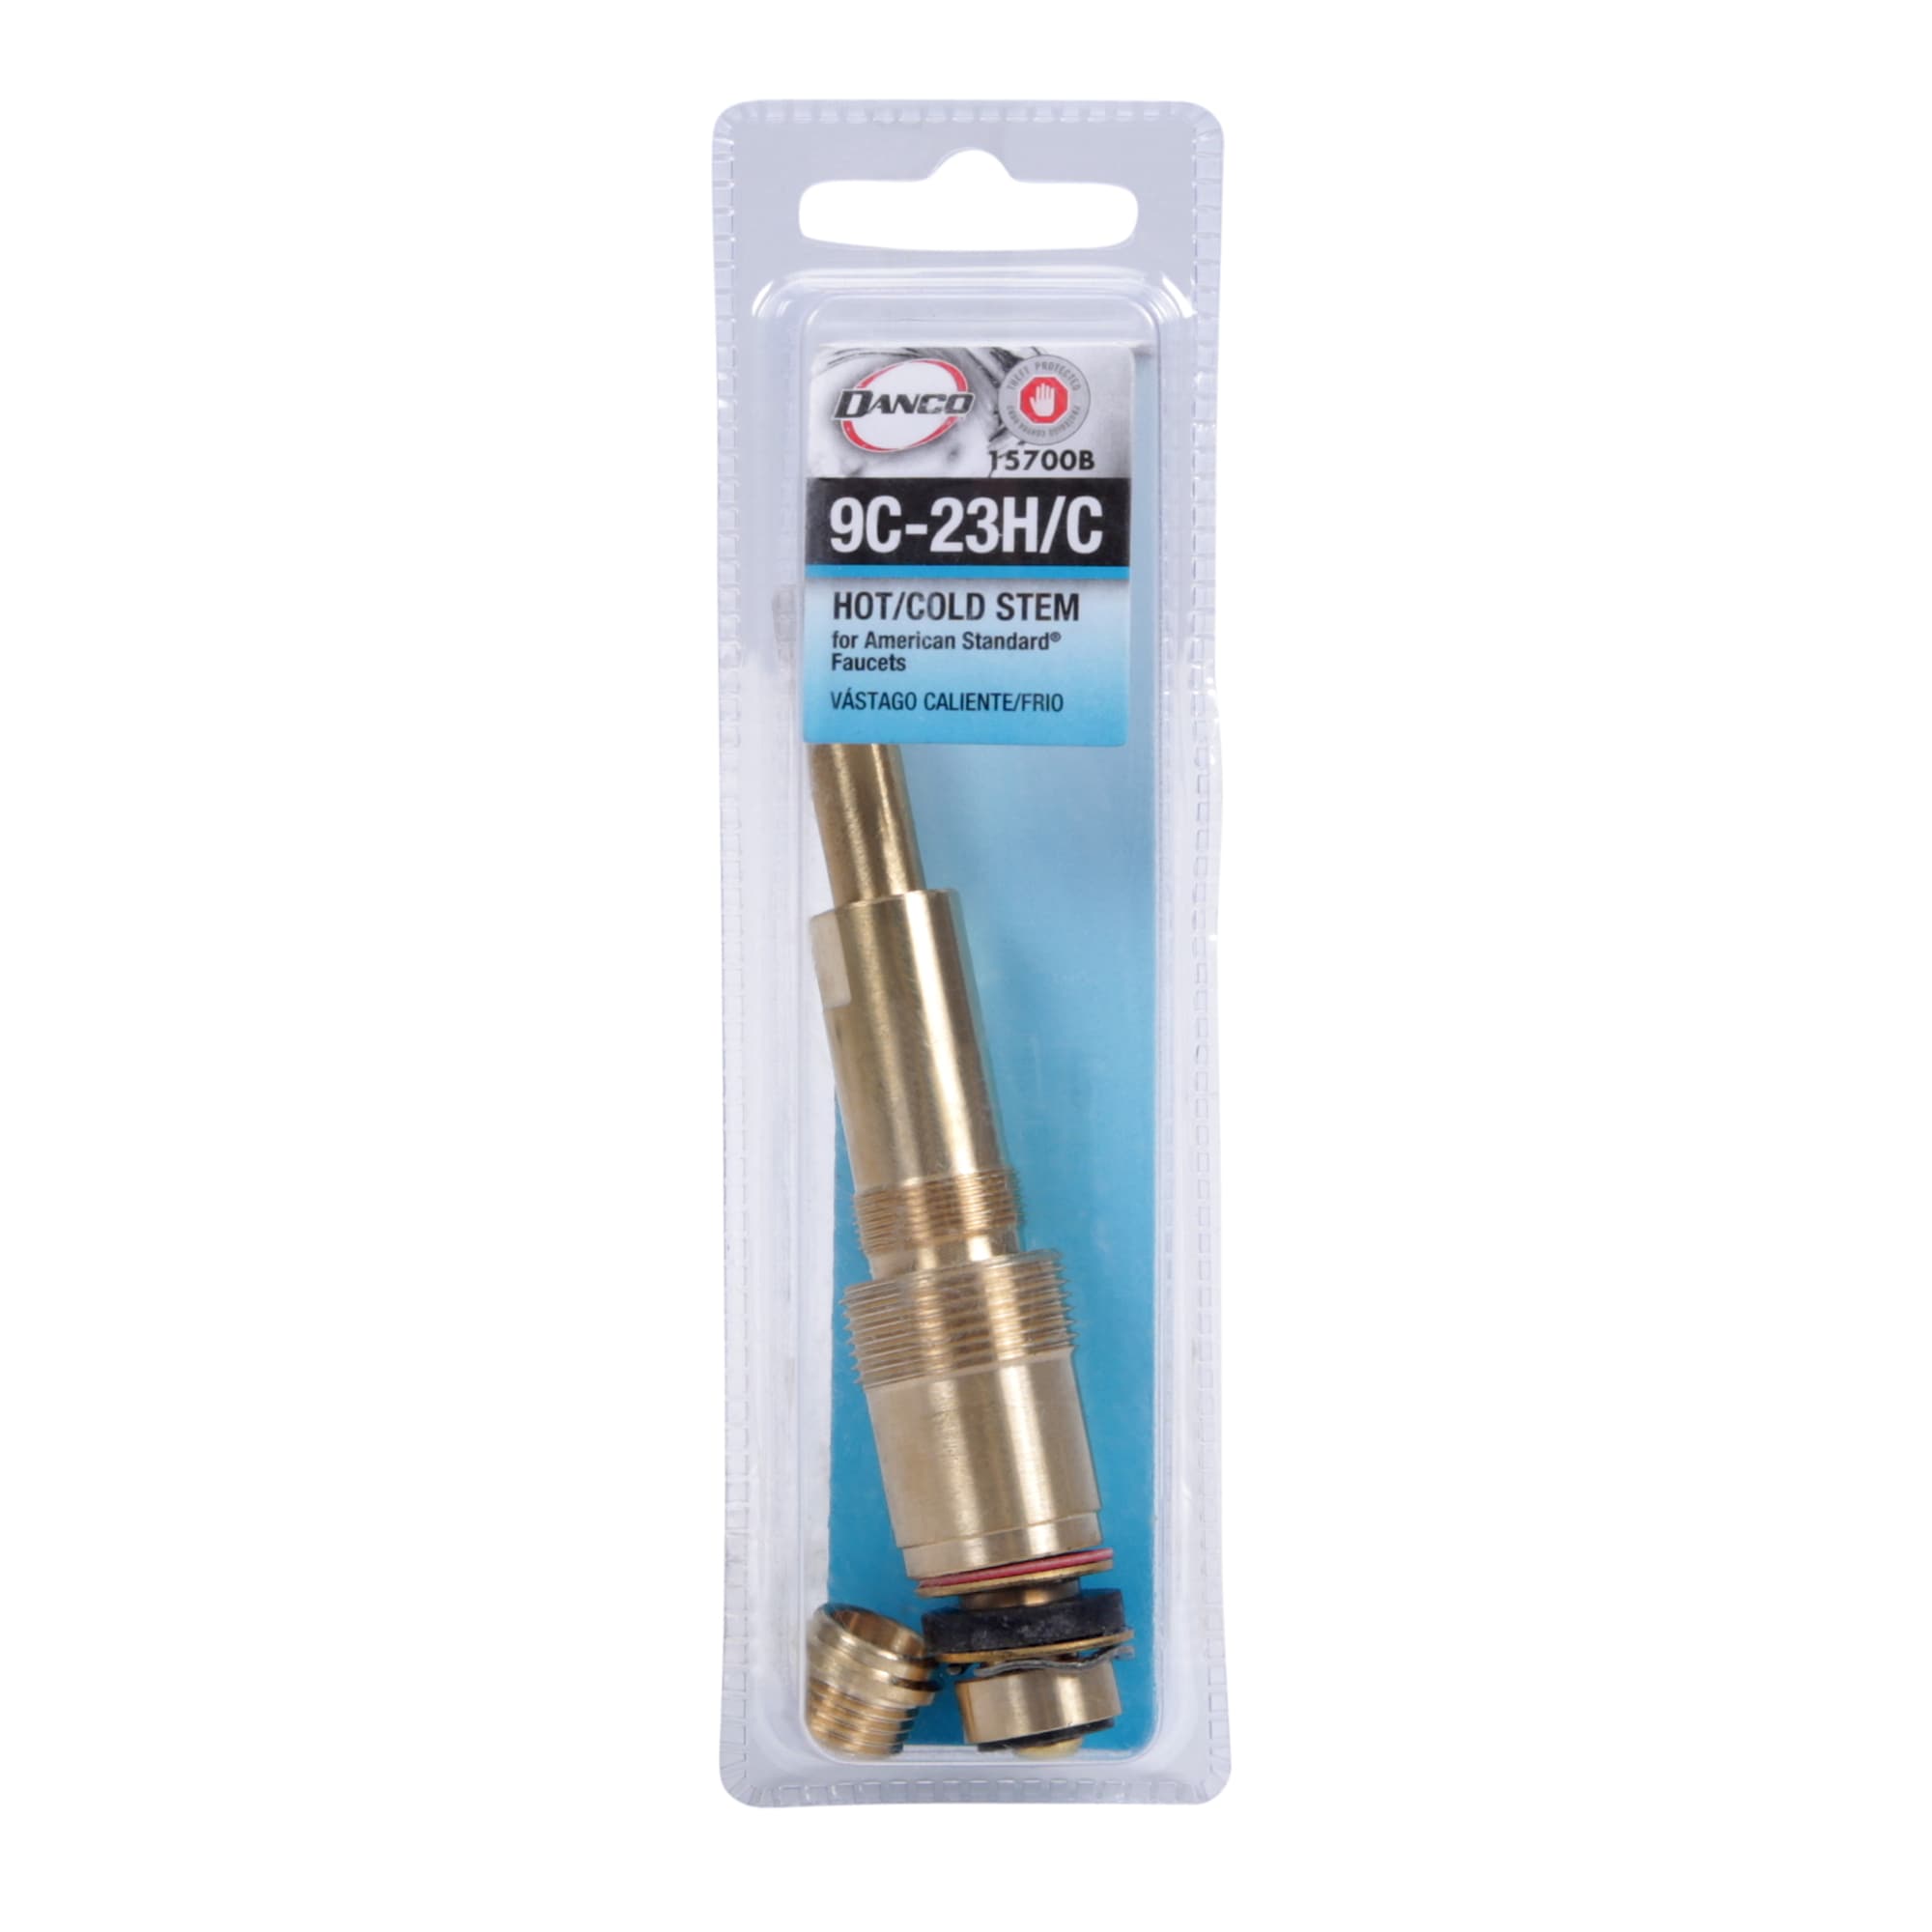 Danco 2-Handle Brass Tub/Shower Valve Stem for American Standard in the  Faucet Stems & Cartridges department at